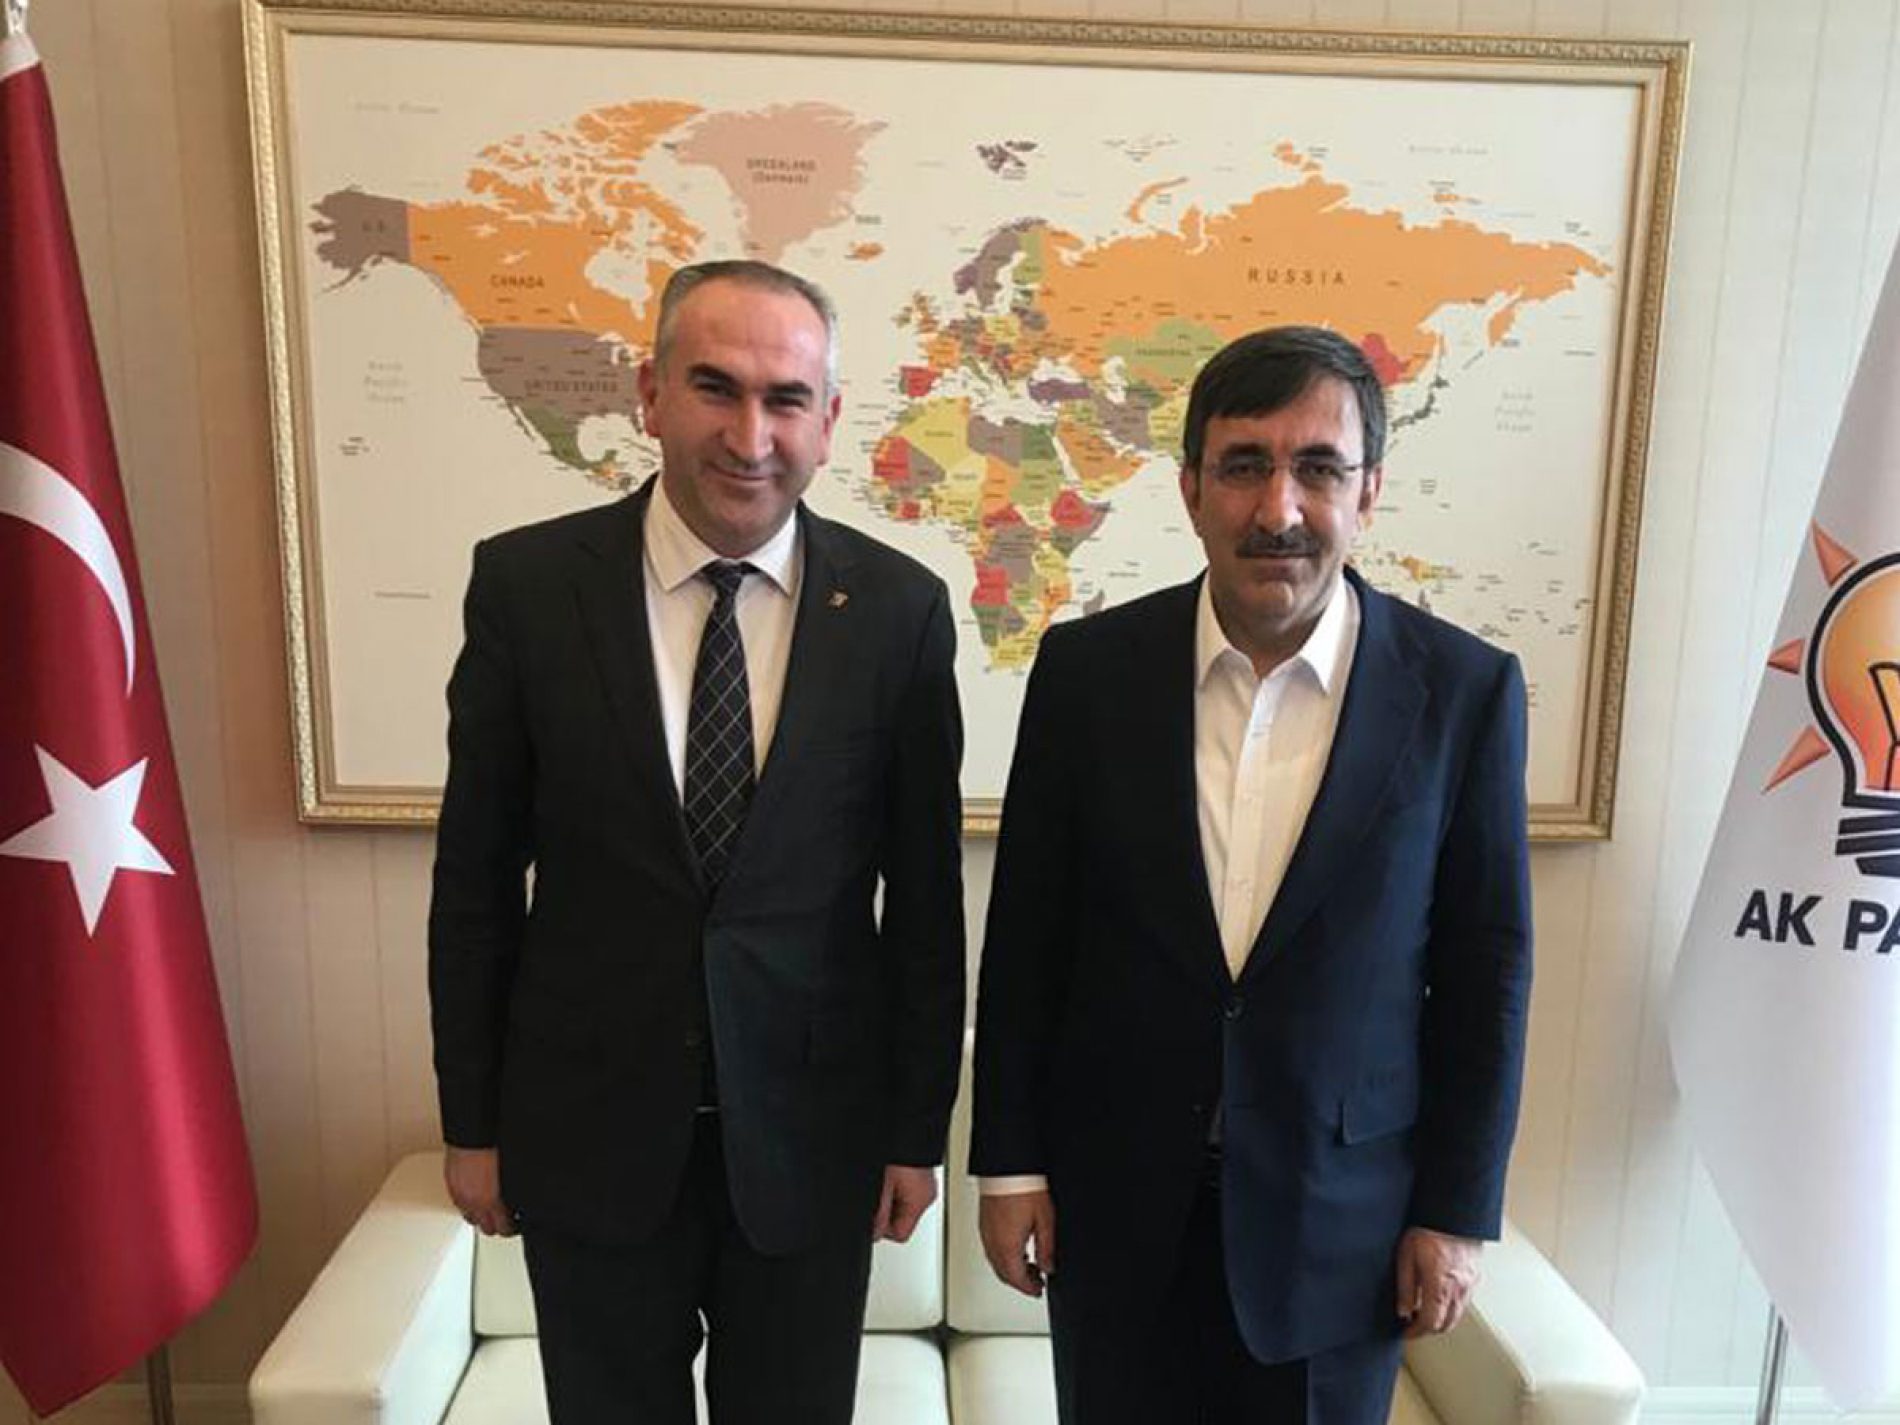 Our Board Chairman, Mr. İhsan BEŞER visited Mr. Cevdet YILMAZ,AK Party Head of Foreign Relations